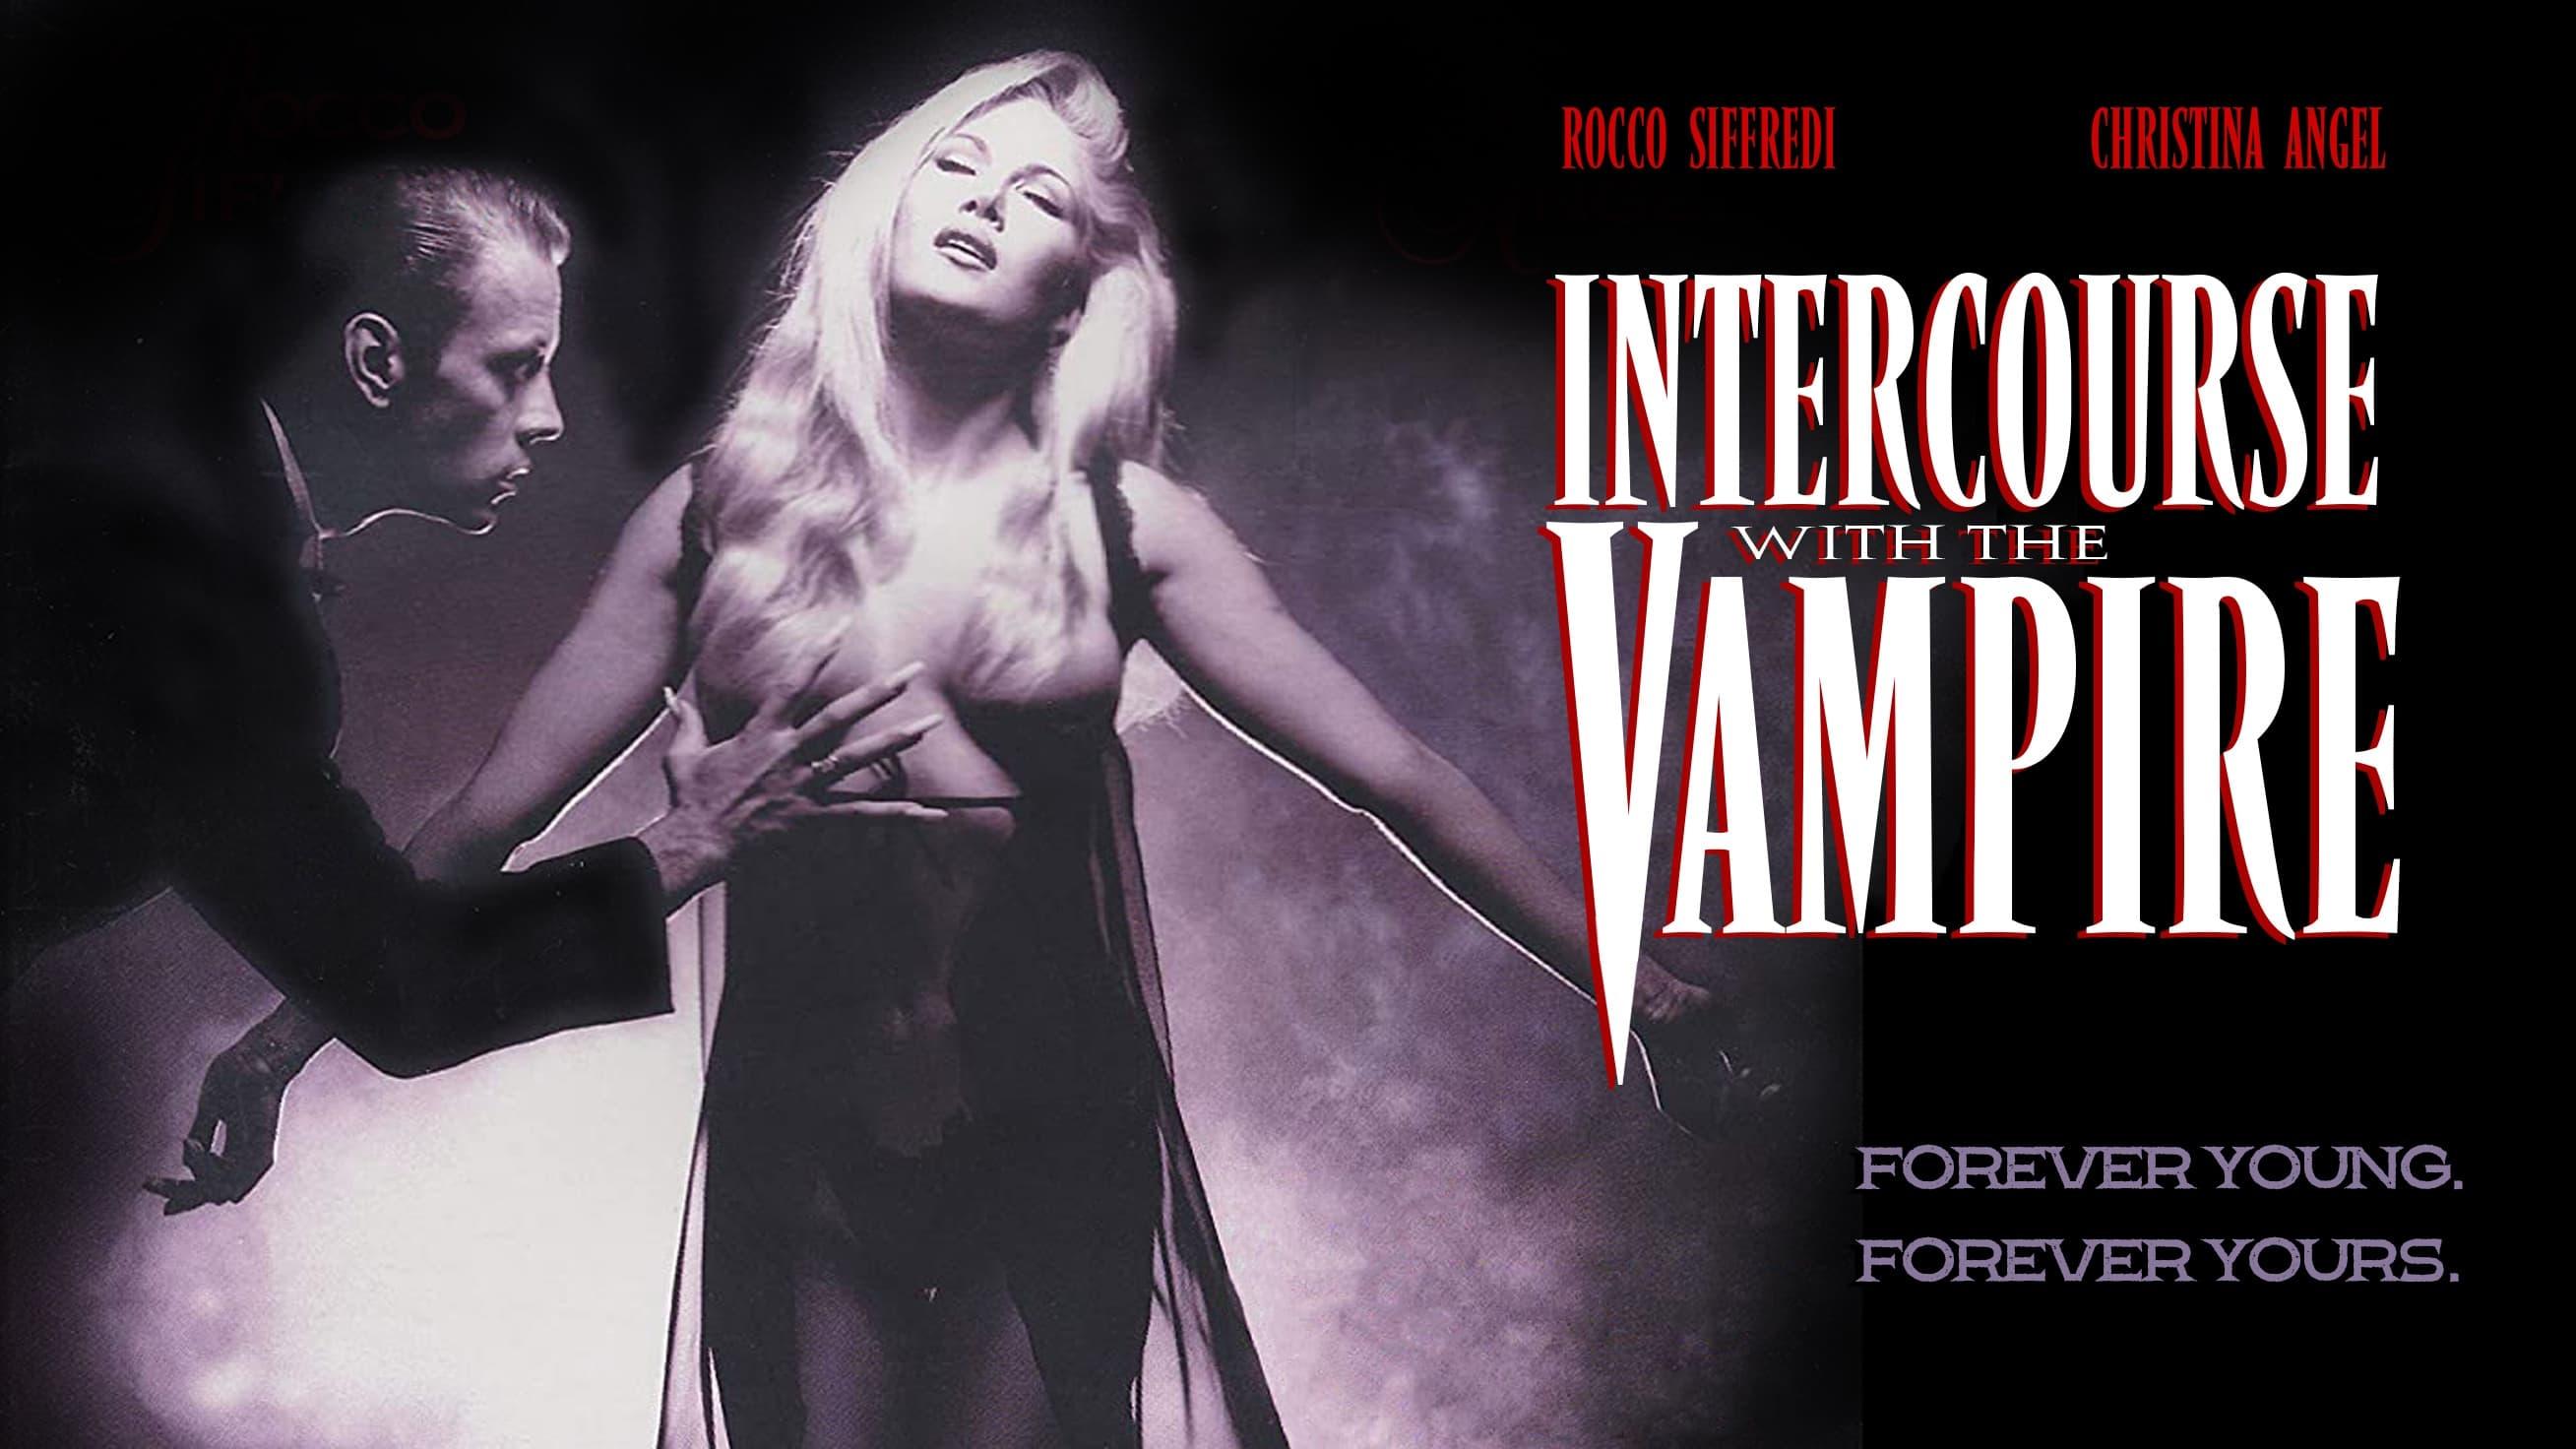 Intercourse with the Vampire backdrop